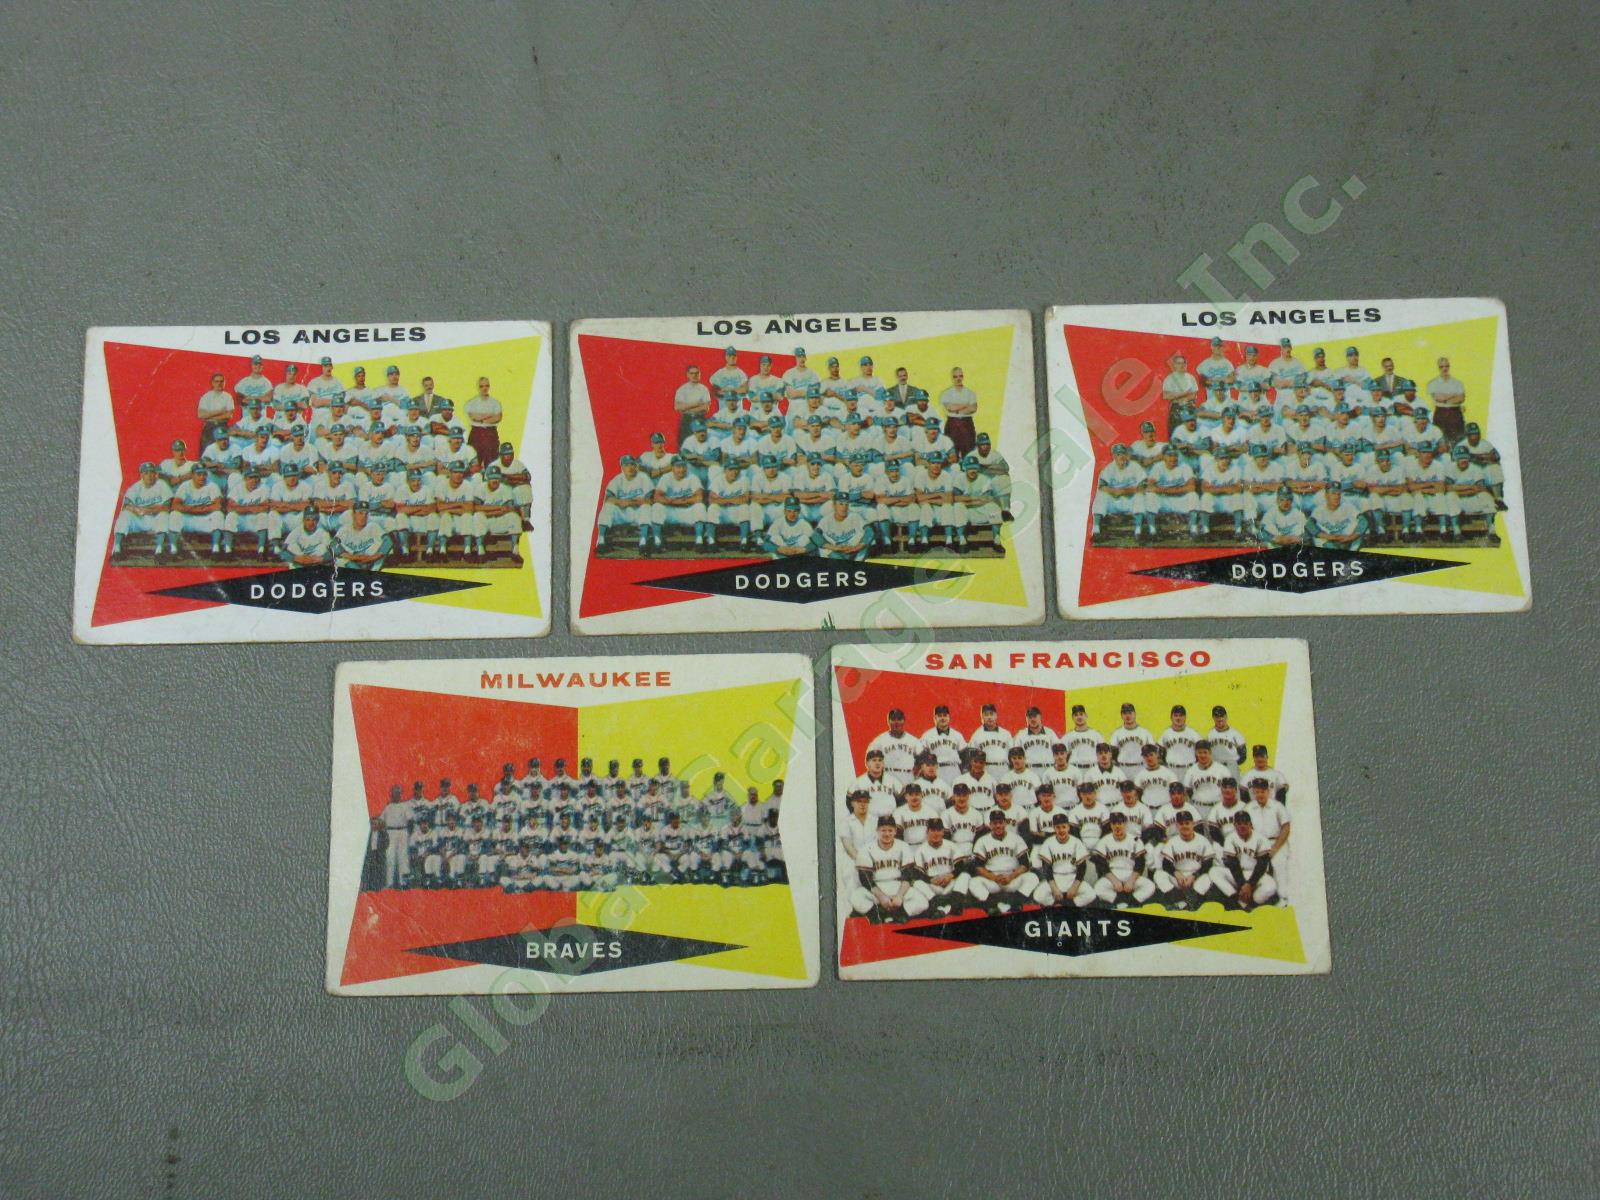 248 Vintage 1960 1960s Topps Baseball Card Lot Rookie Stars Teams Managers NR! 5